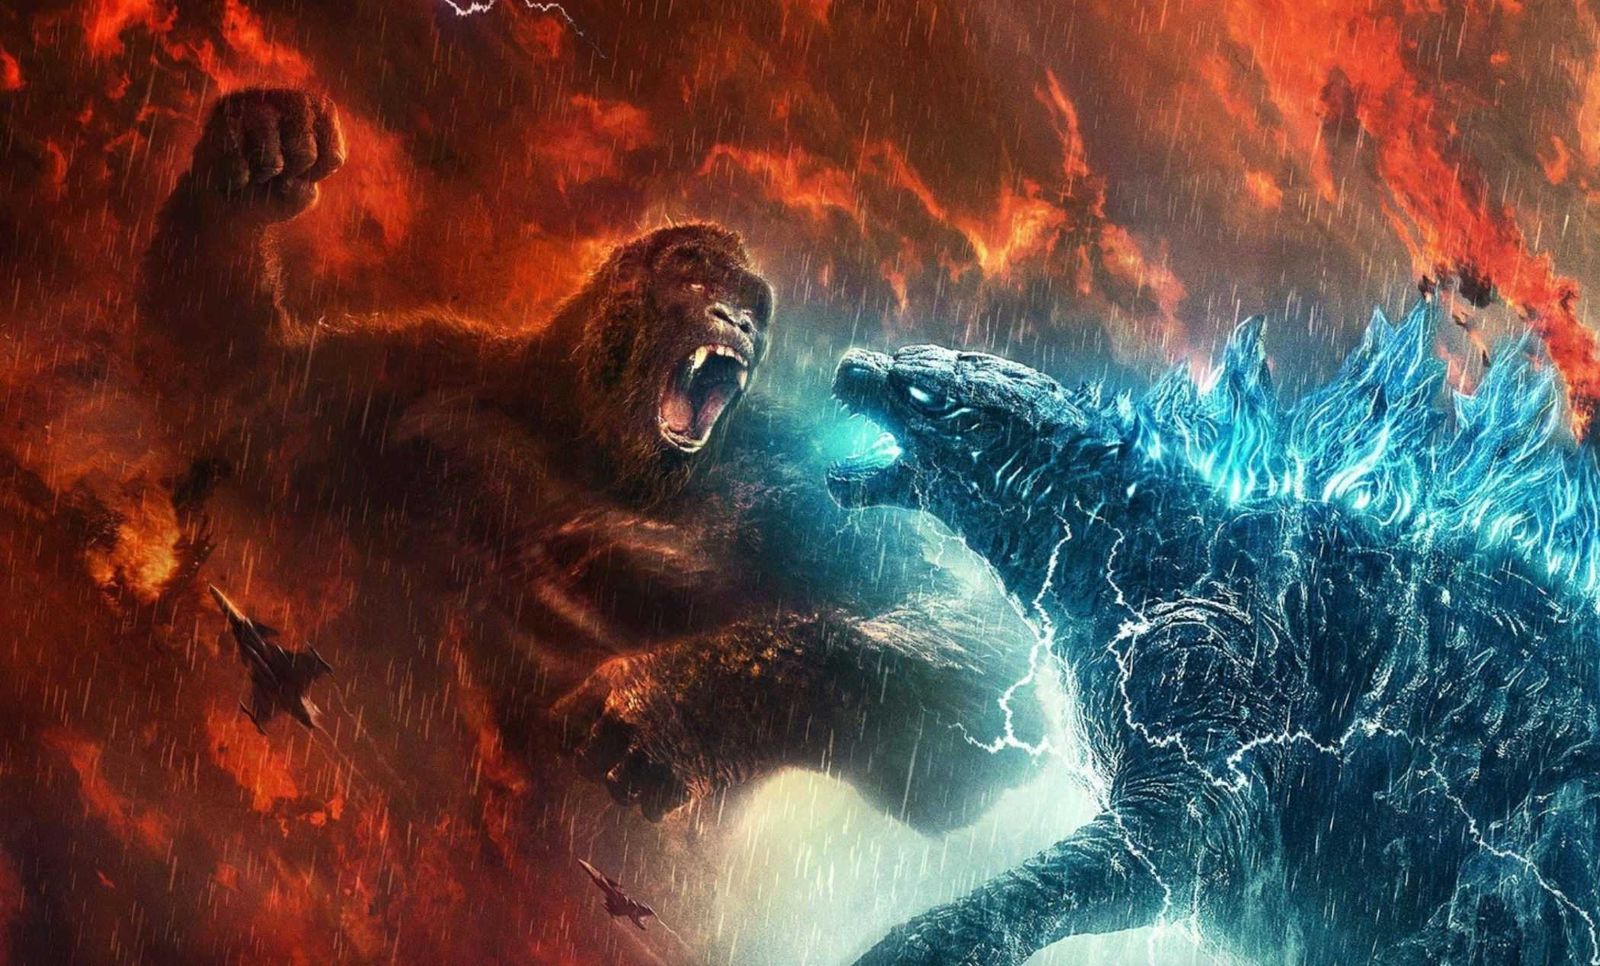 Godzilla Vs. Kong 2 plot details and full cast announced by Legendary Pictures